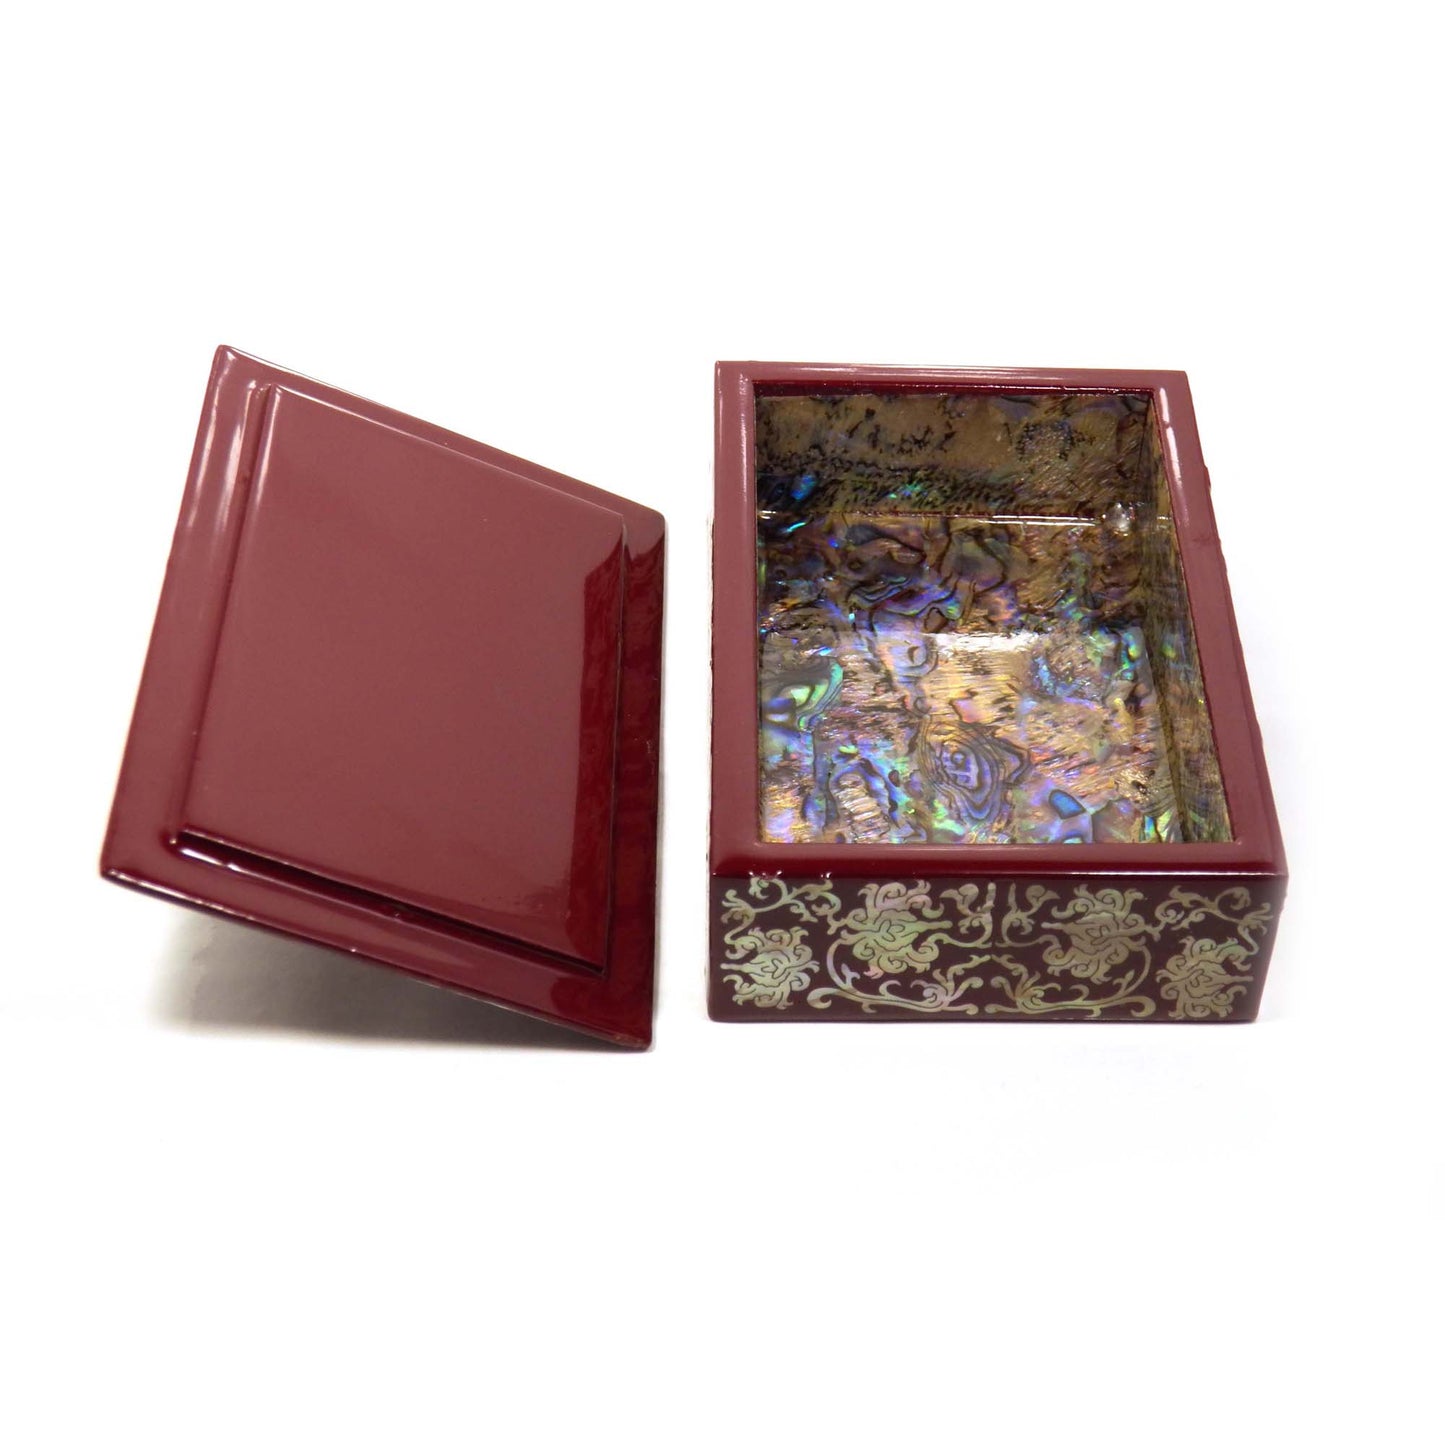 Bat Design Jewelry Box, Koreian Red Lacquer Wood Trinket Box, Mother of Pearl Inlay